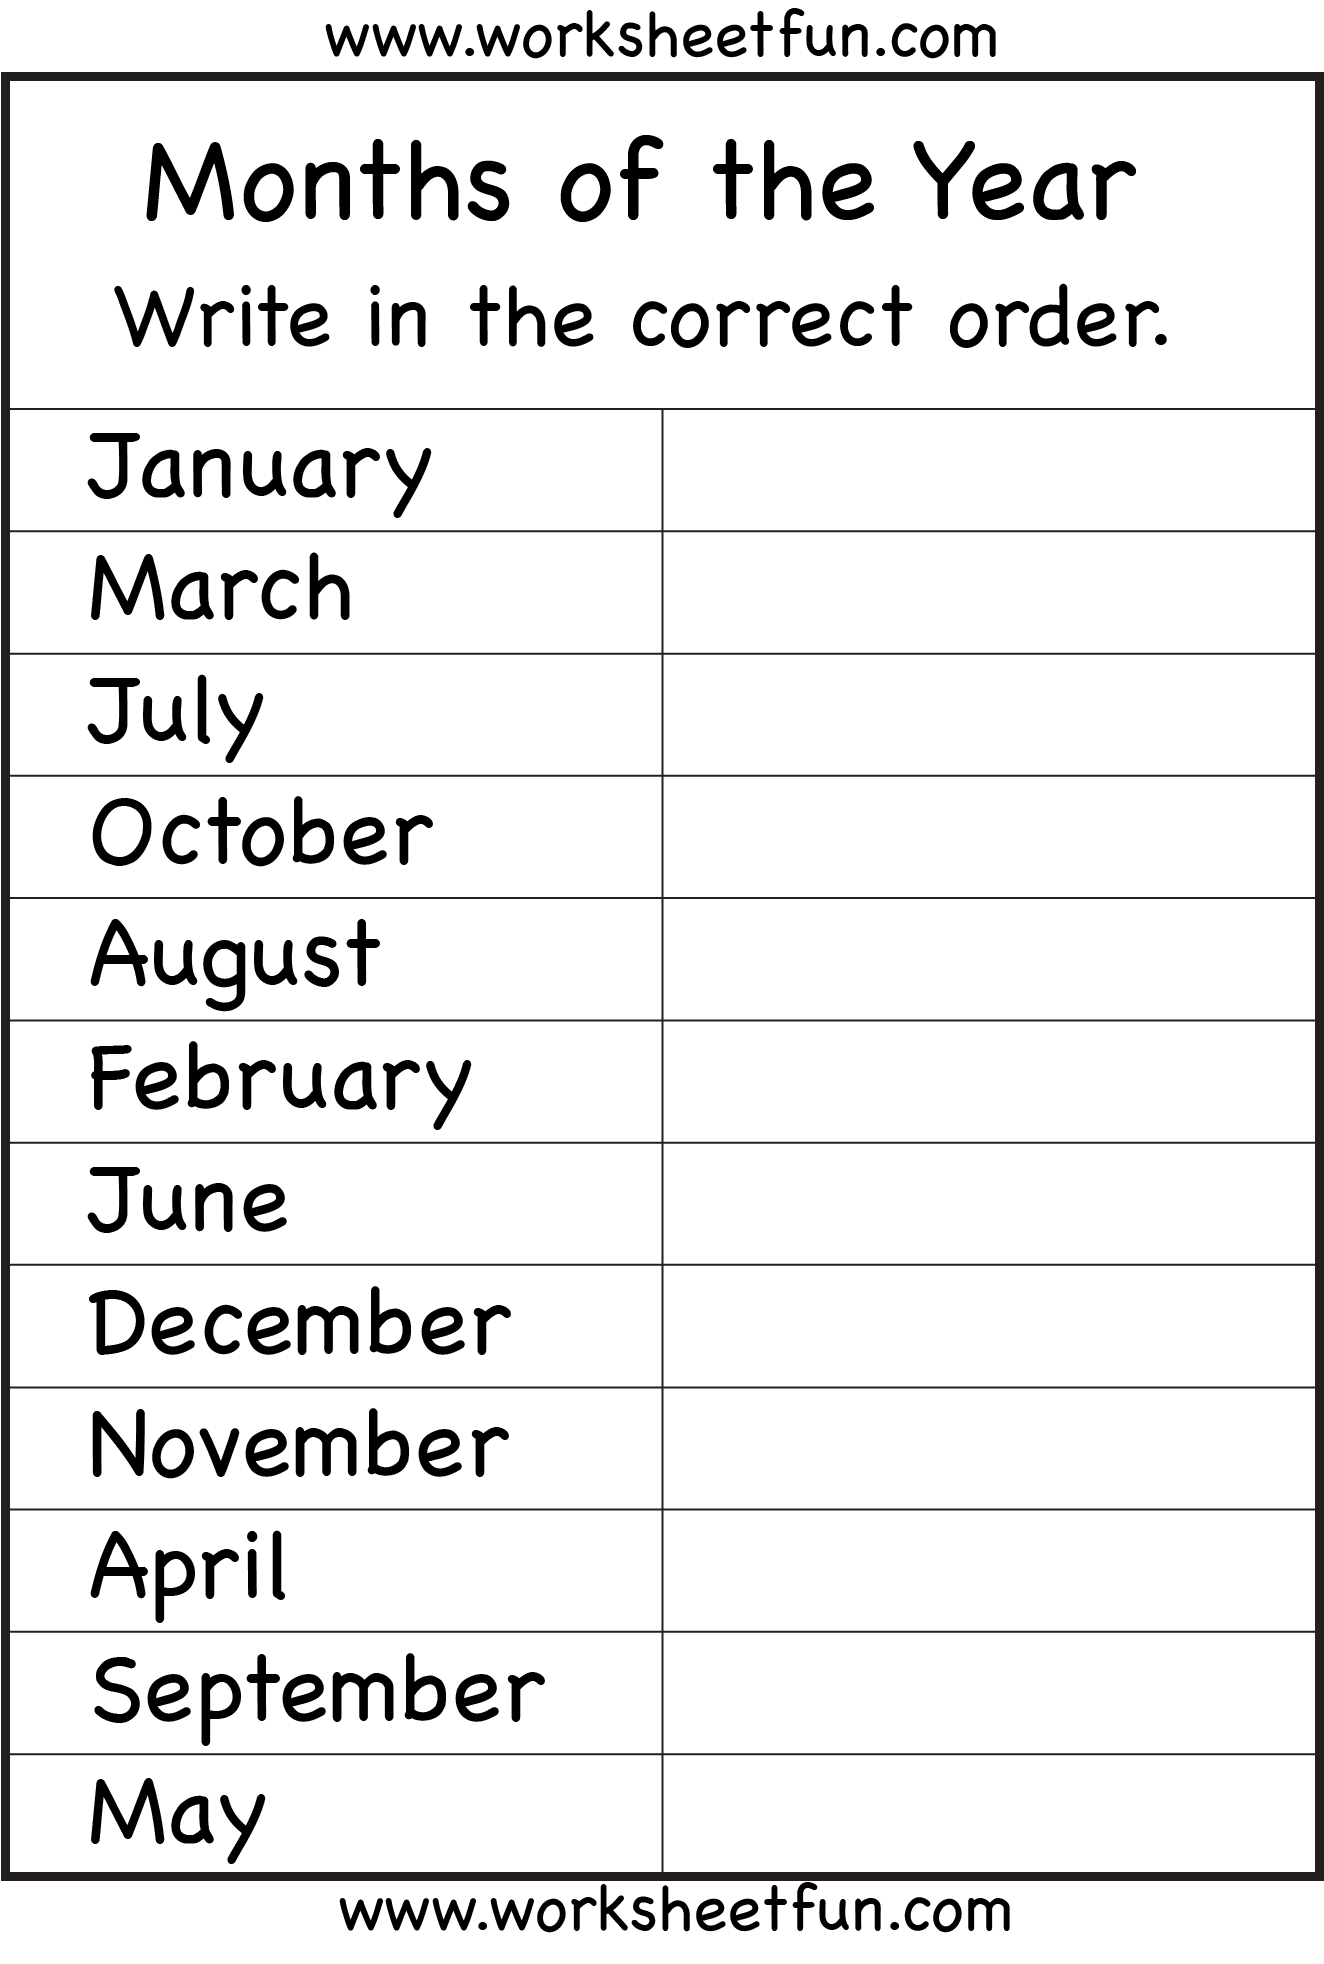 Free Printable Months of the Year Worksheet Image